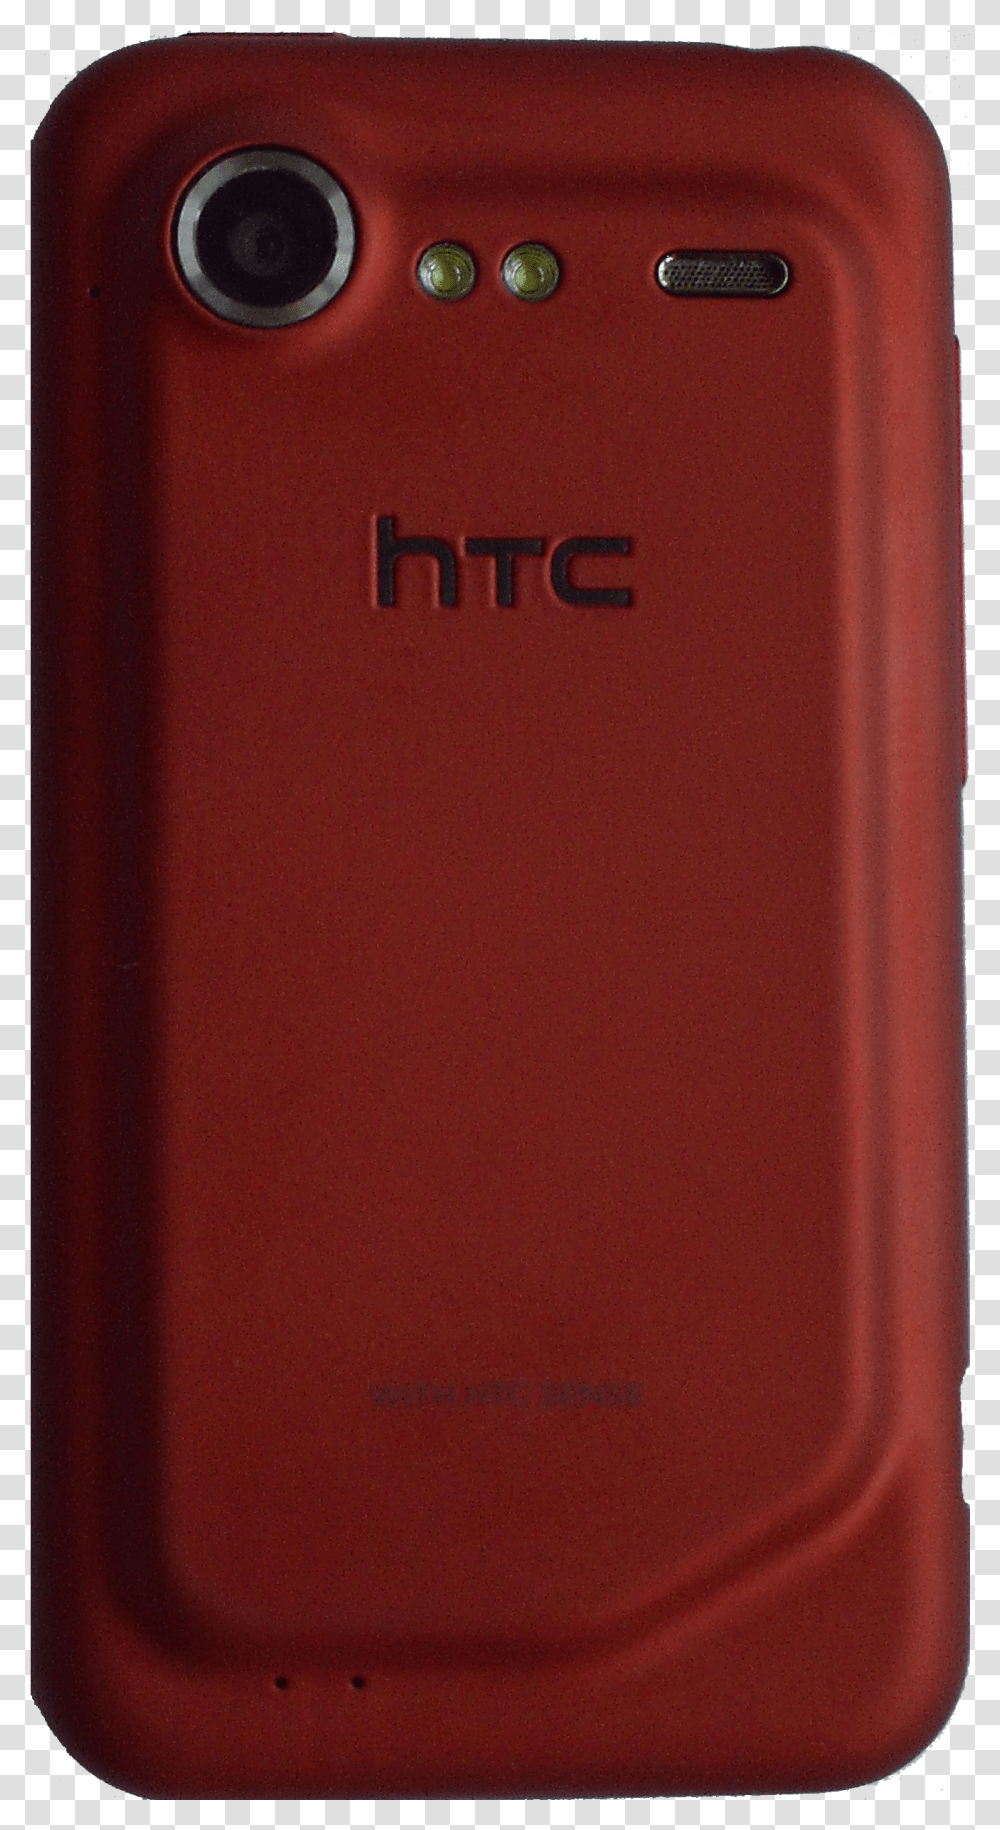 Htc Incredible S Smartphone Transparent Png